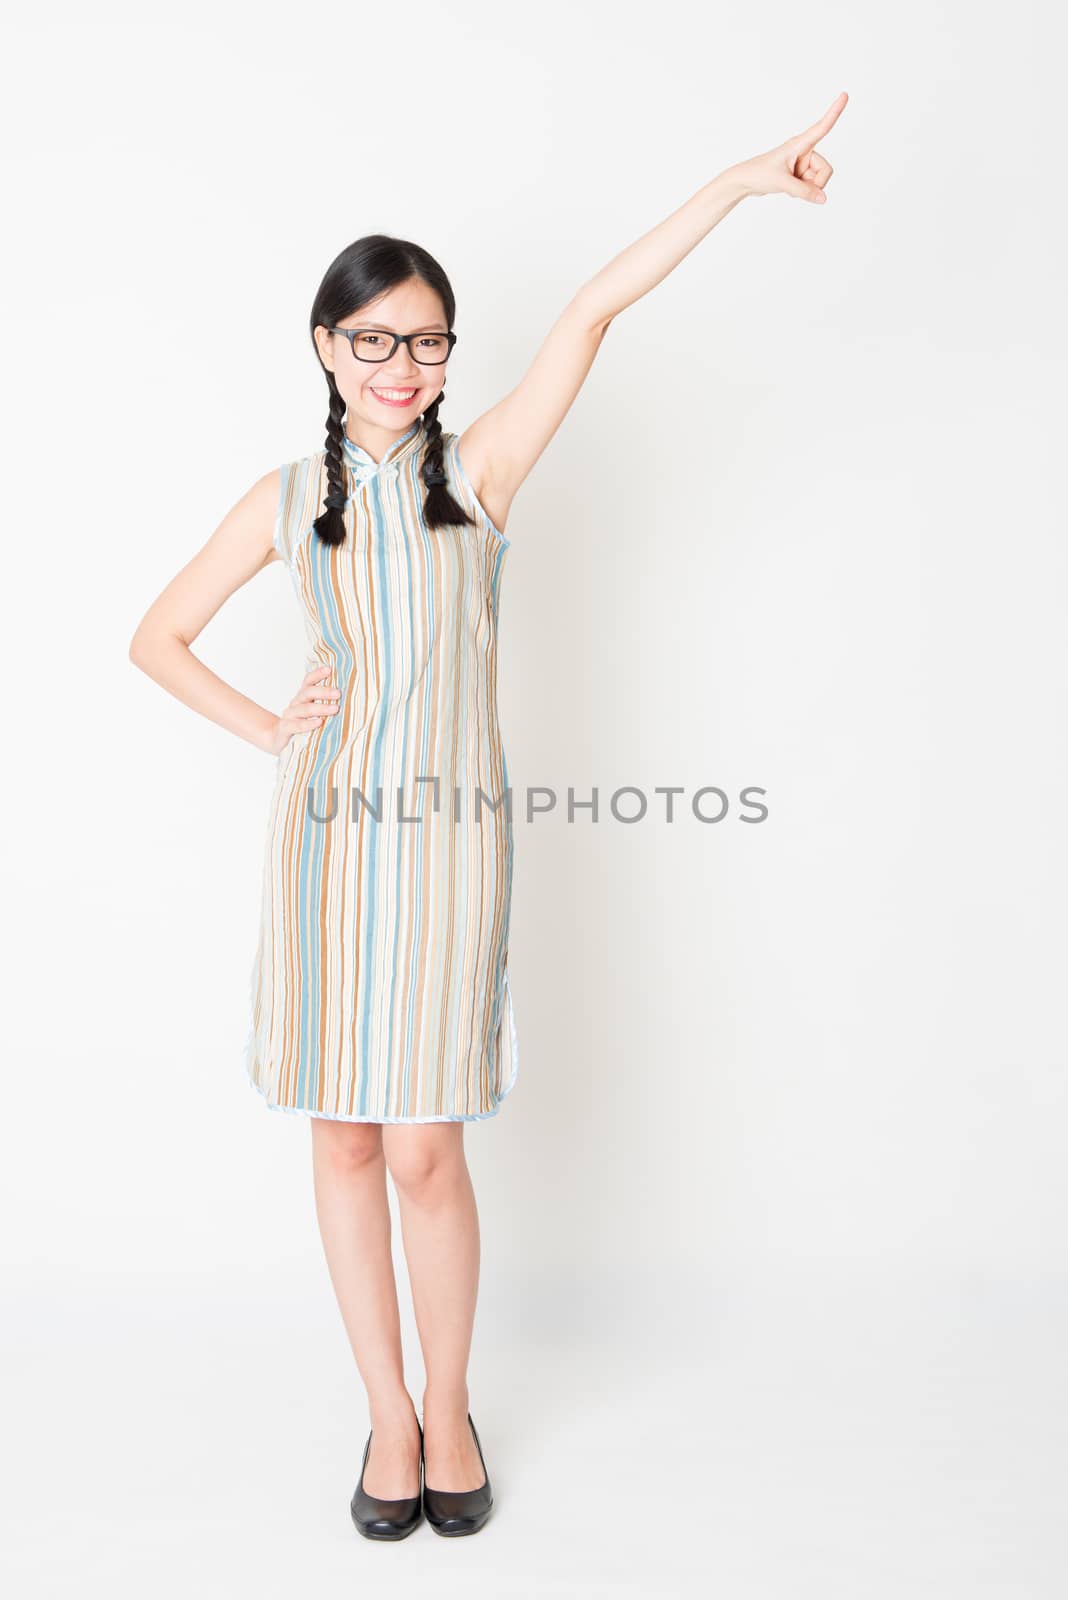 Portrait of young Asian girl in traditional qipao dress finger pointing away, full length standing on plain background.